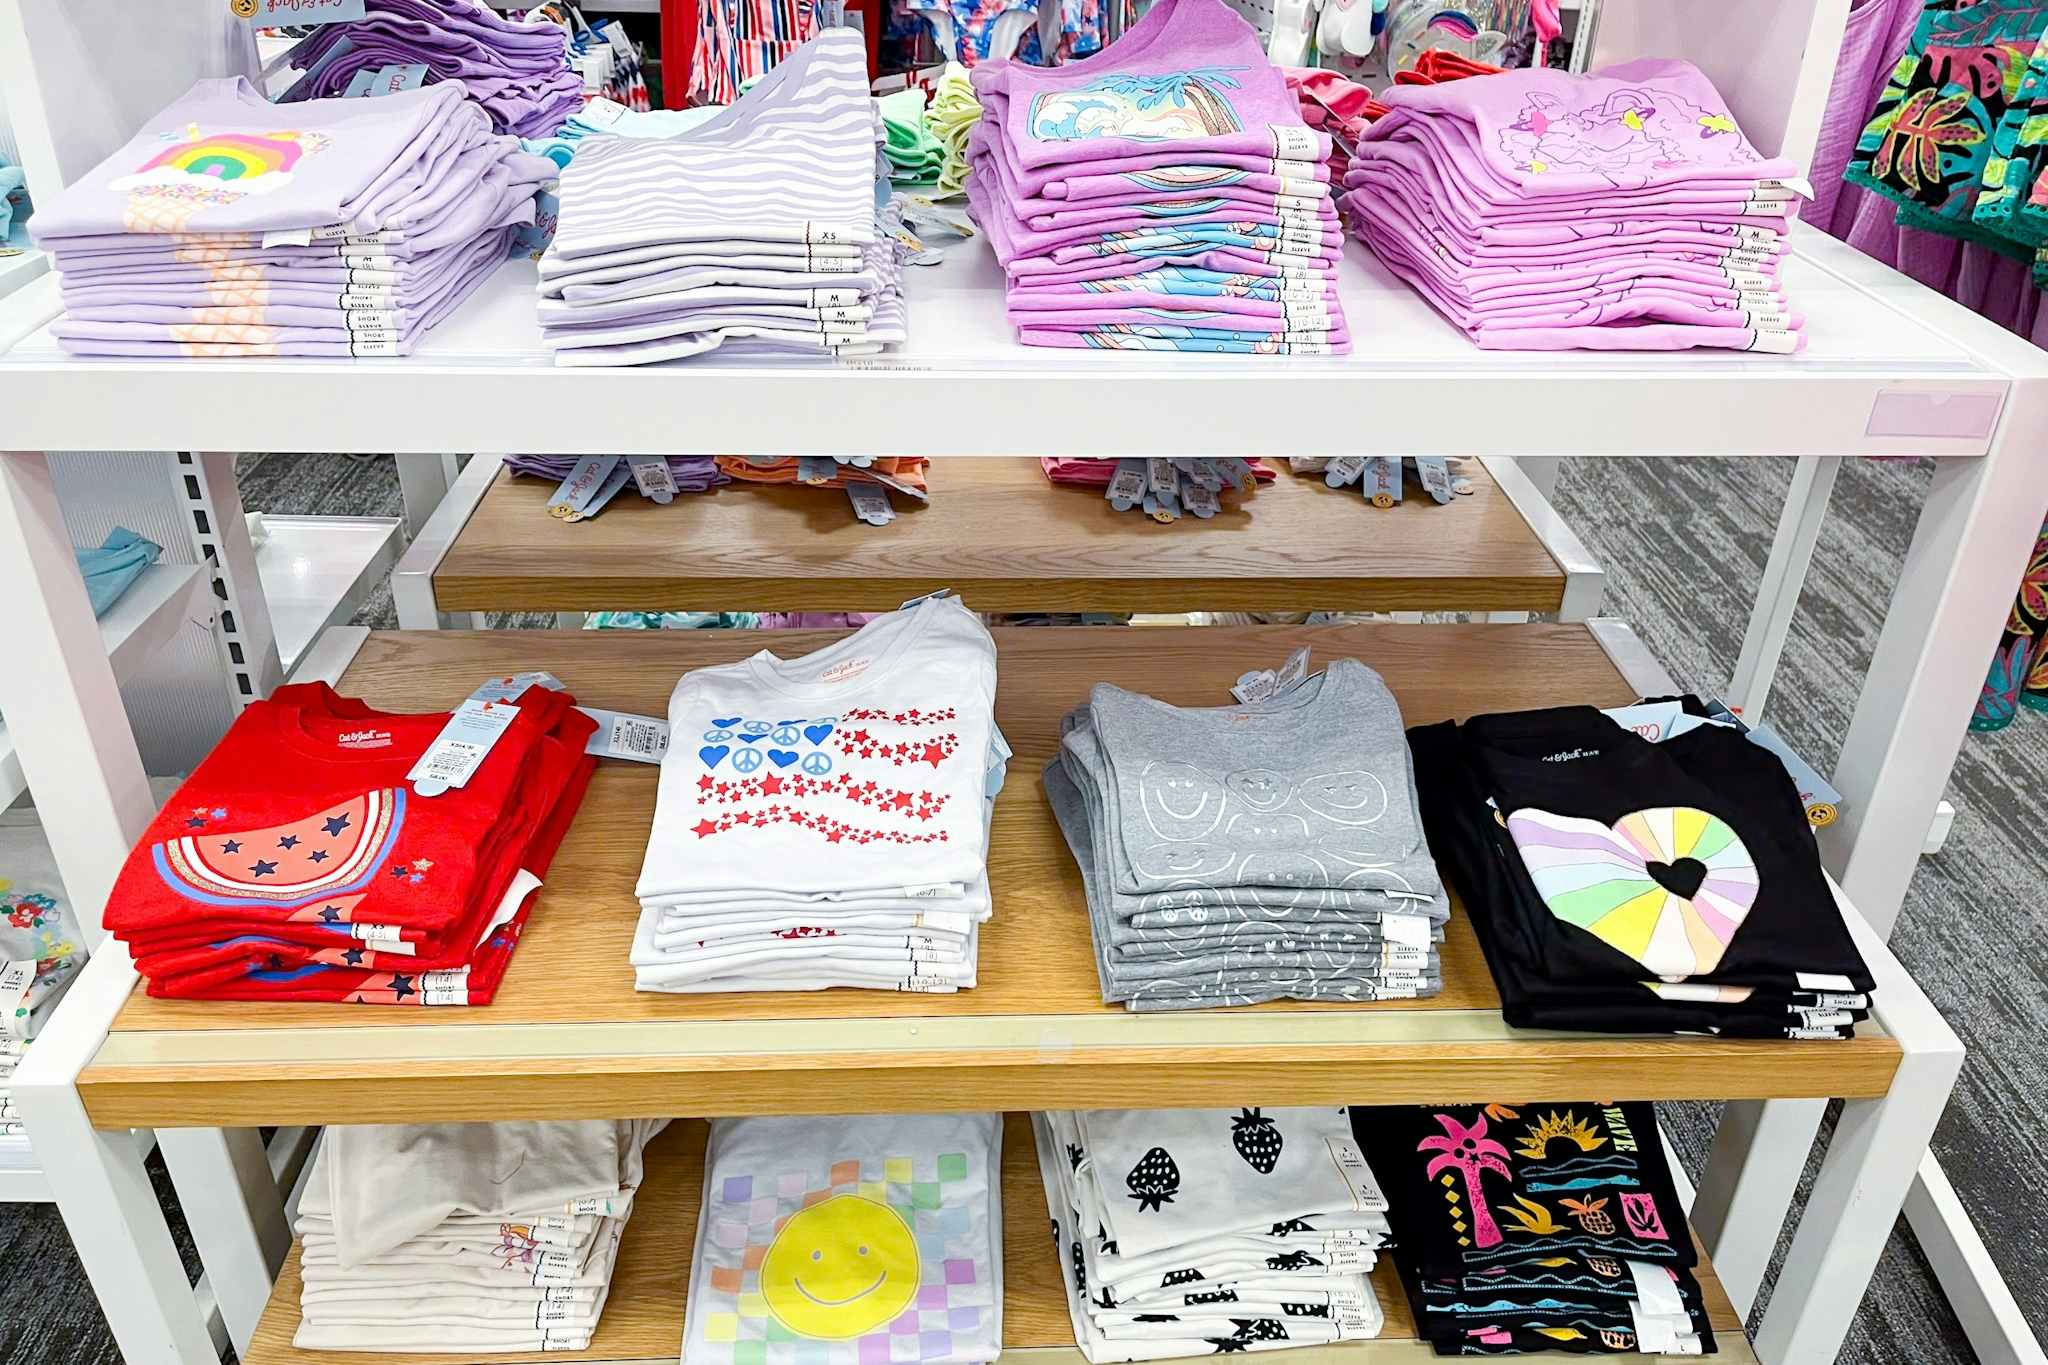 Children's Apparel on Sale at Target: $3 Shirts and $6 Dresses